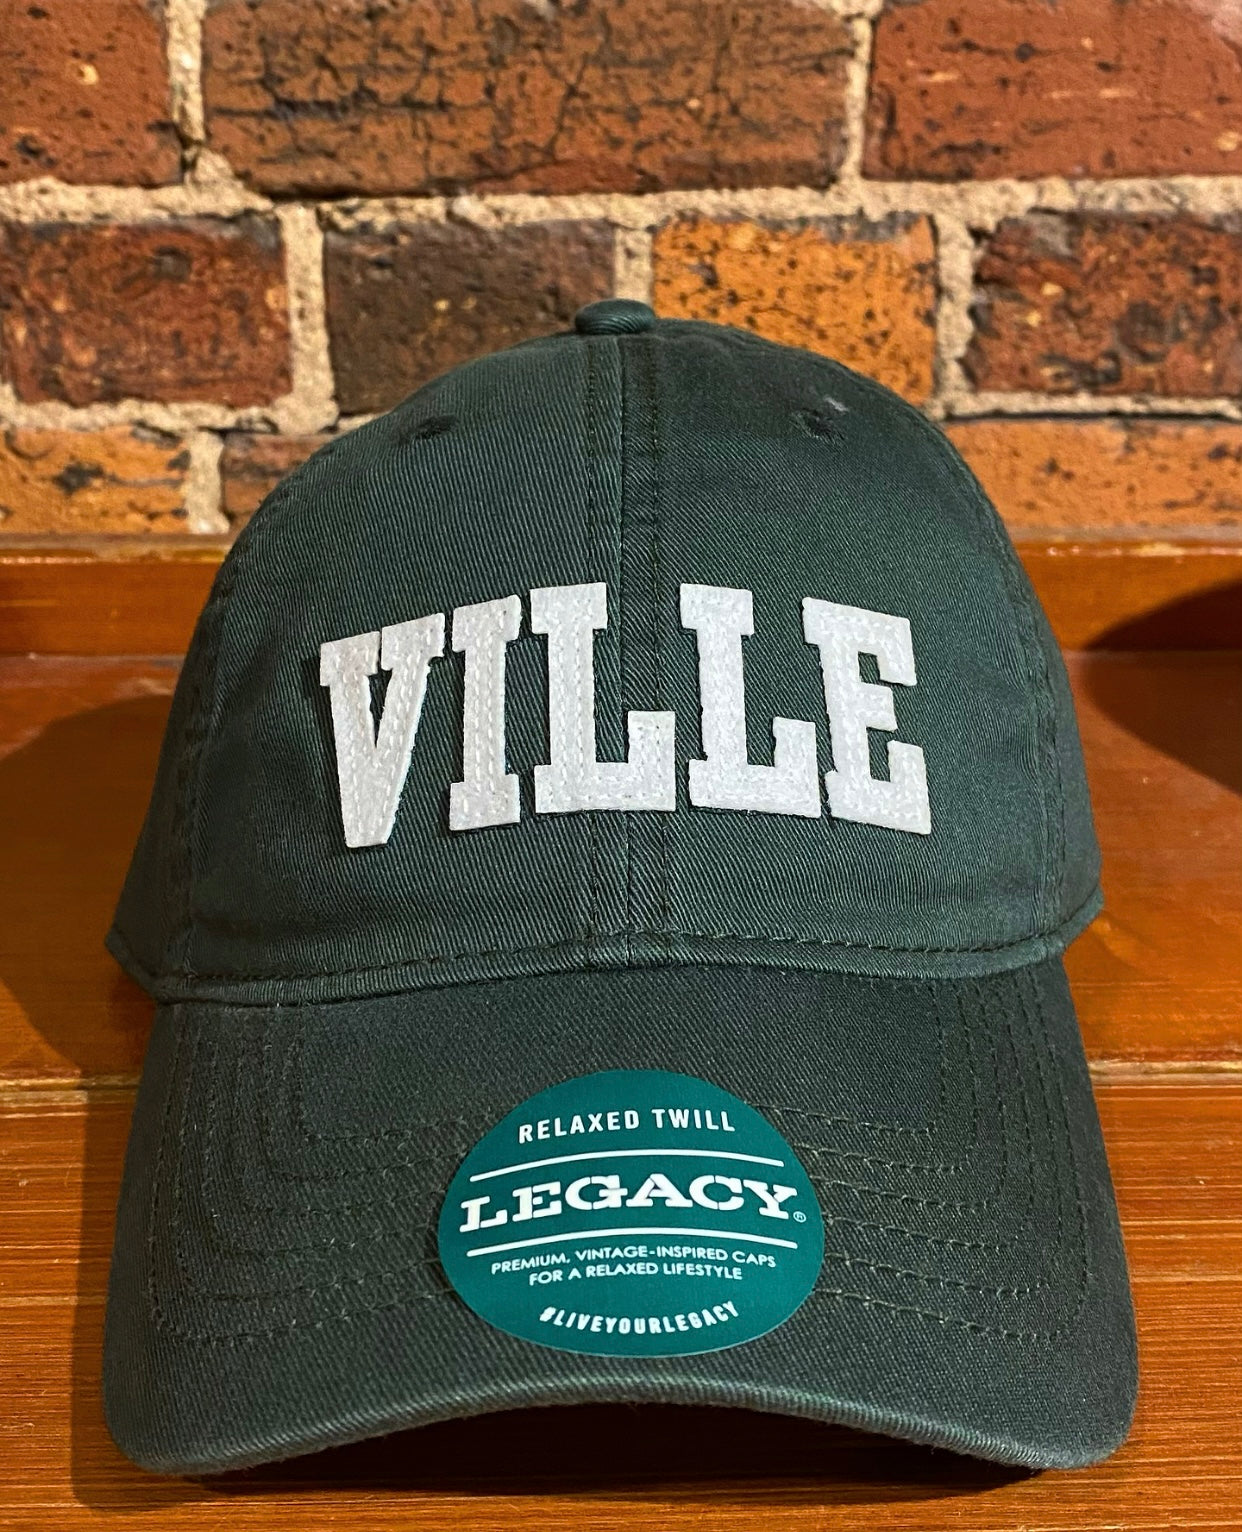 VILLE hat by Legacy